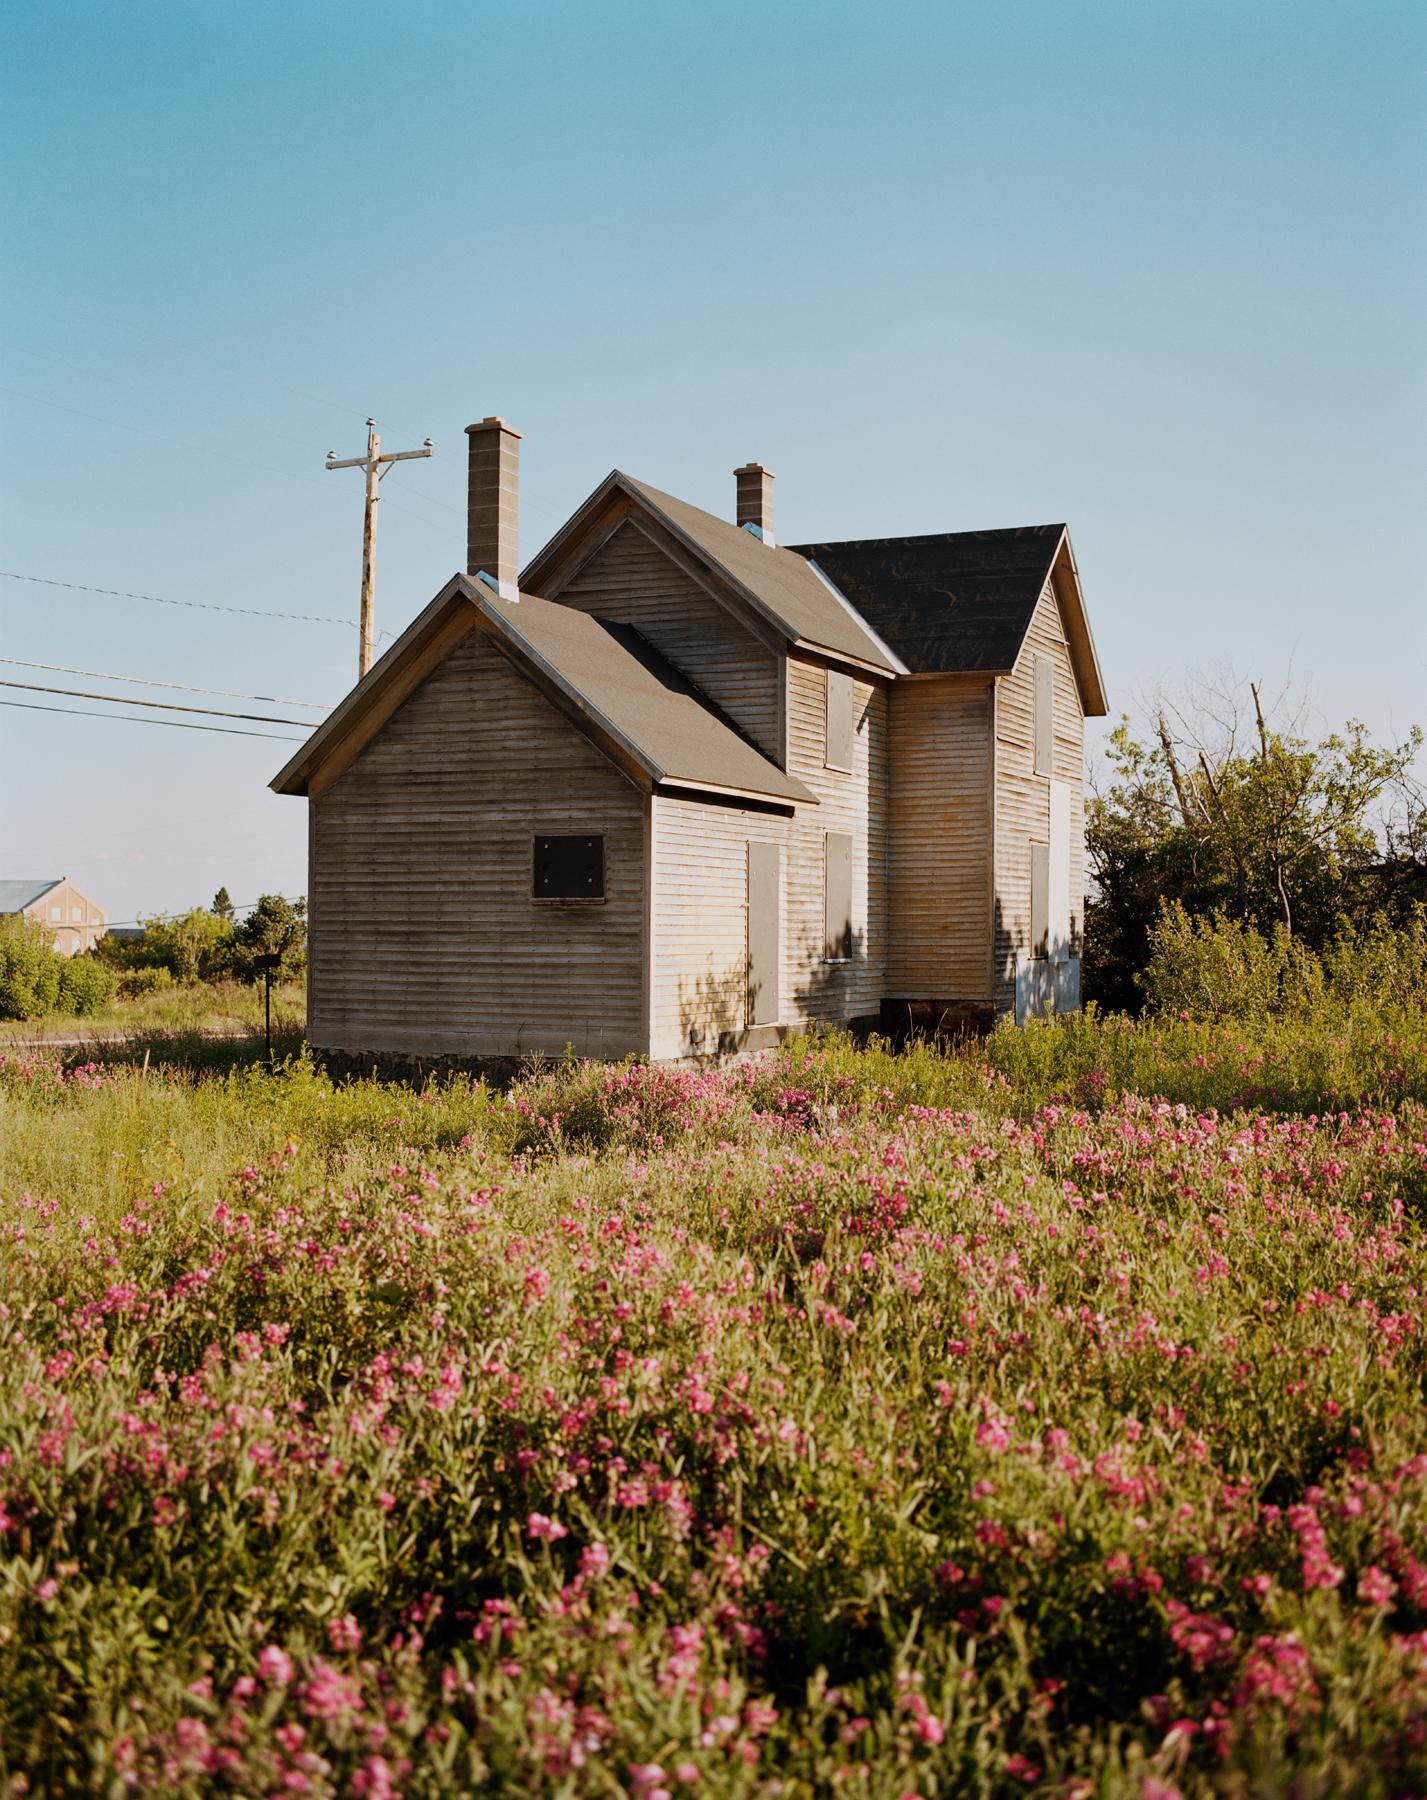 Omaha Sketchbook: House in Field, 2005-2018 - Contemporary Photography, American